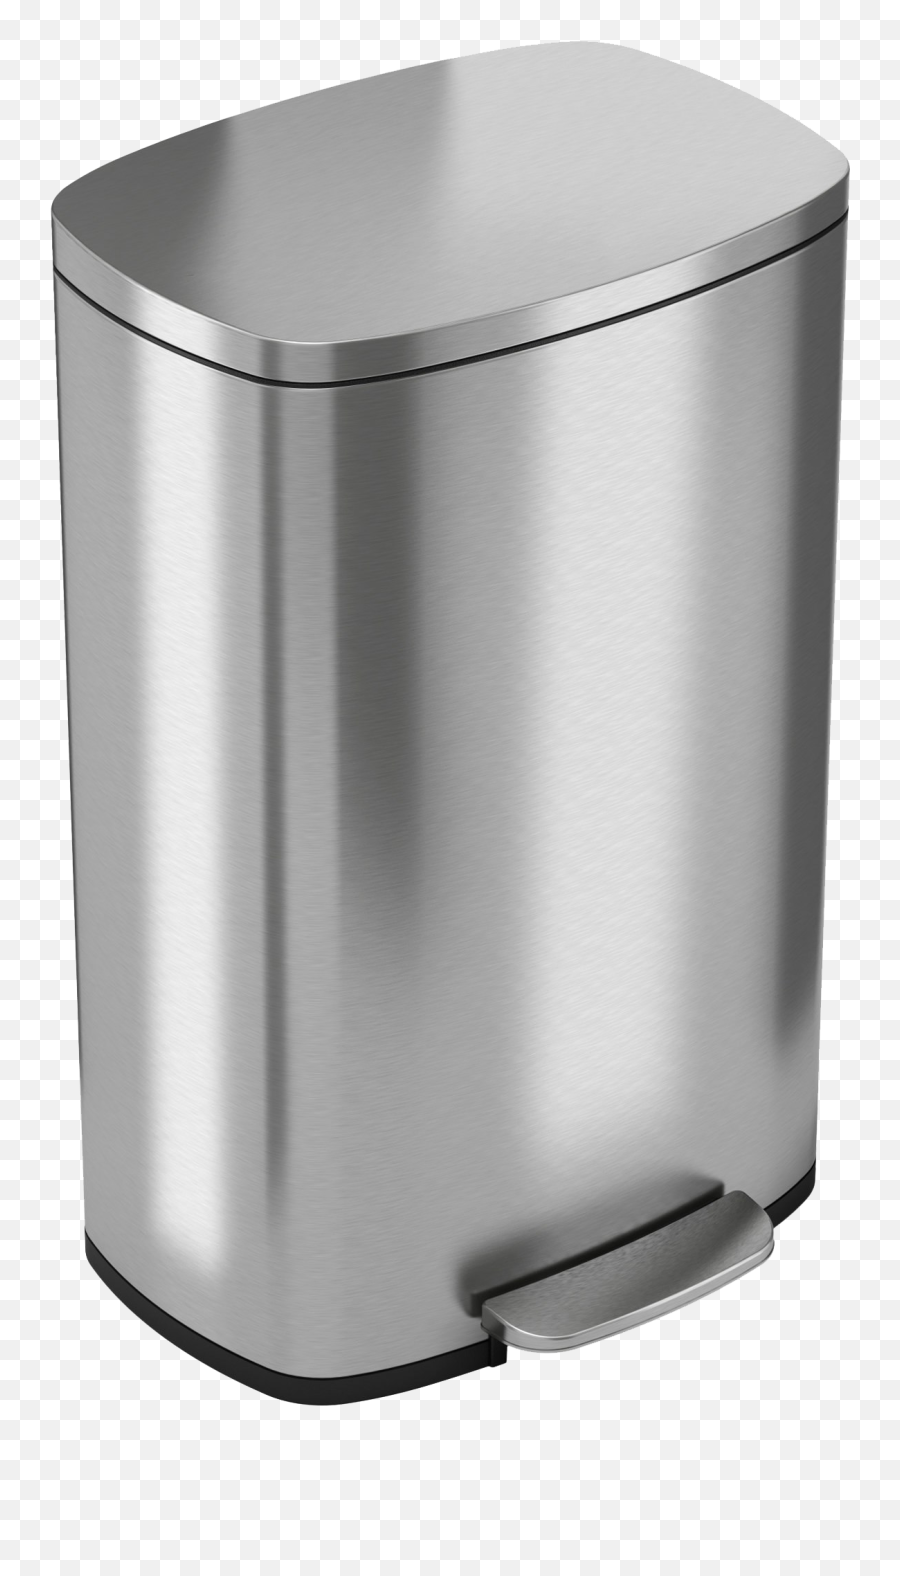 Trash Can Png Pic Background - Kitchen Garbage Can With Lid,Trash Bin Png